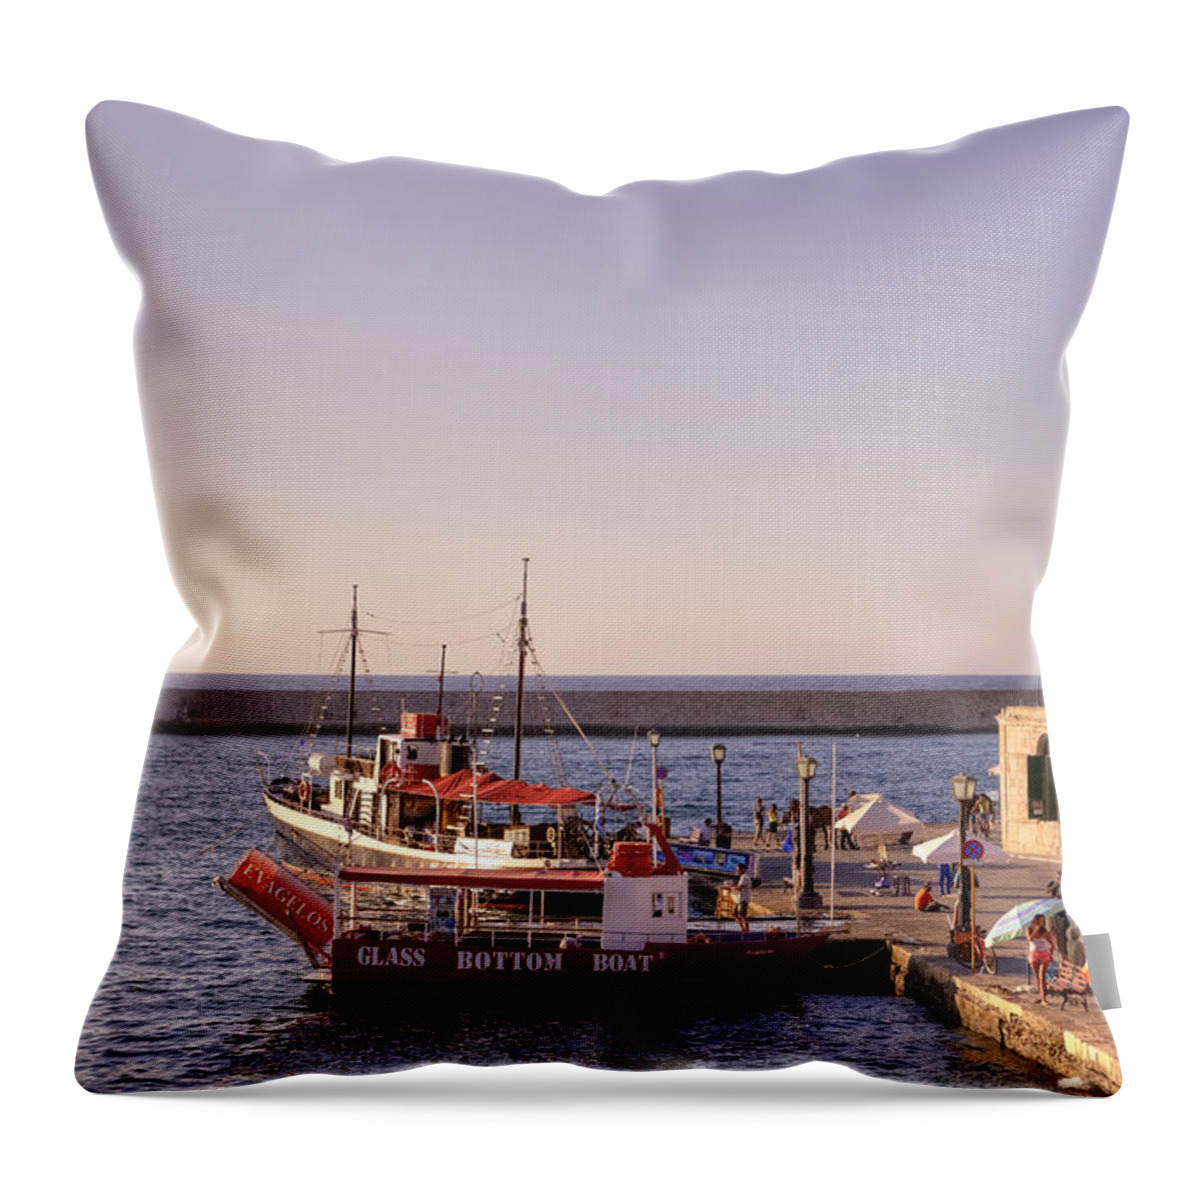 Lighthouse Throw Pillow featuring the photograph Chania - Crete #4 by Joana Kruse